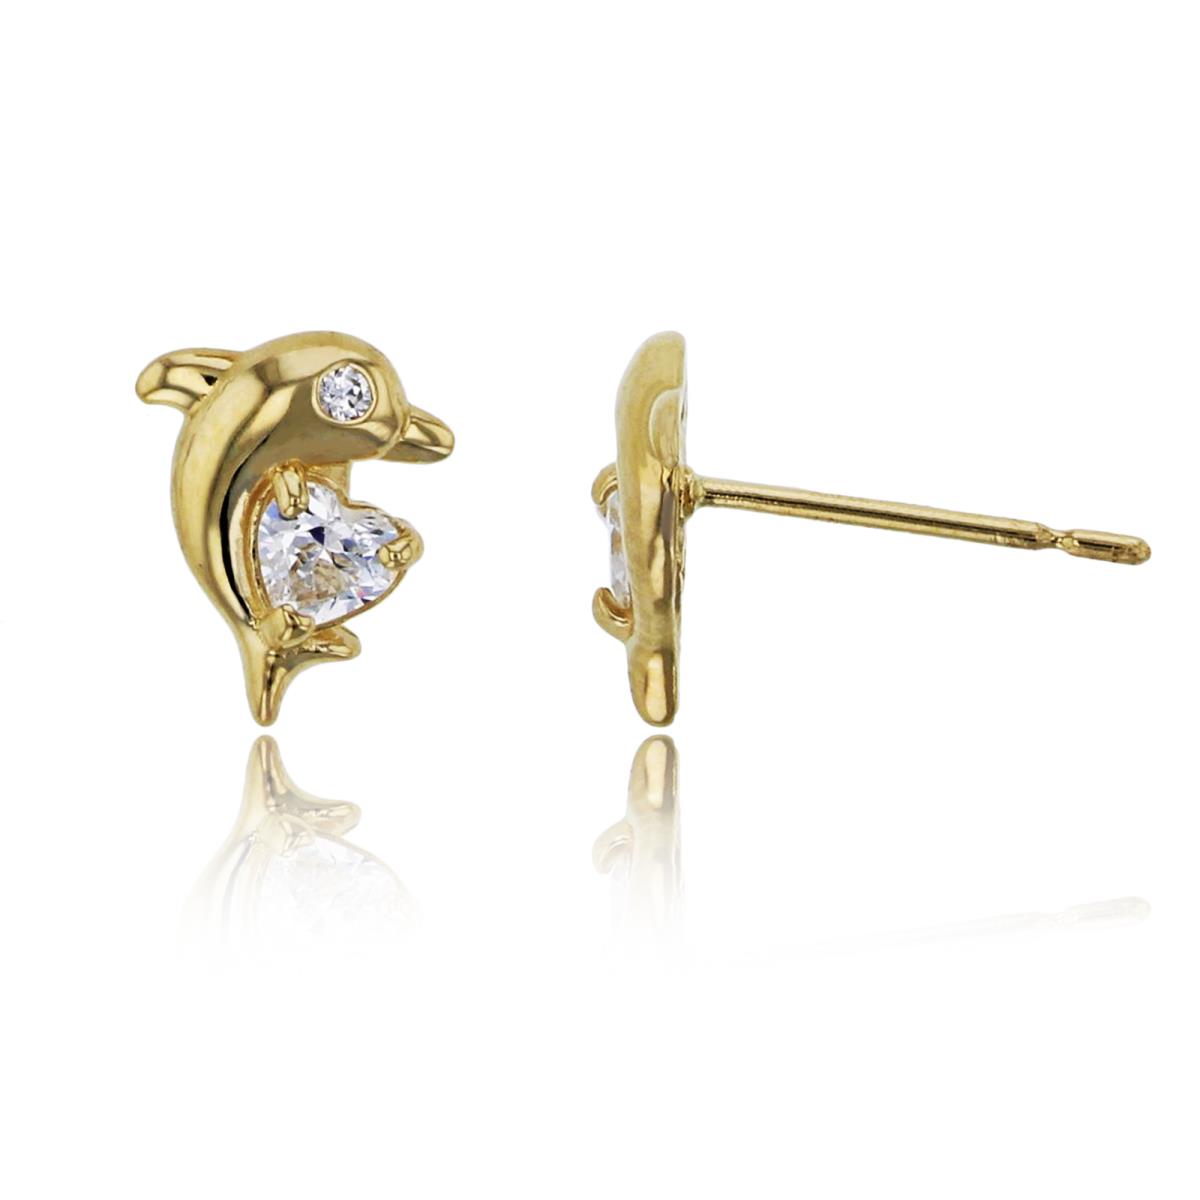 10K Yellow Gold 3mm Heart Cut Polished Dolphin Stud Earring